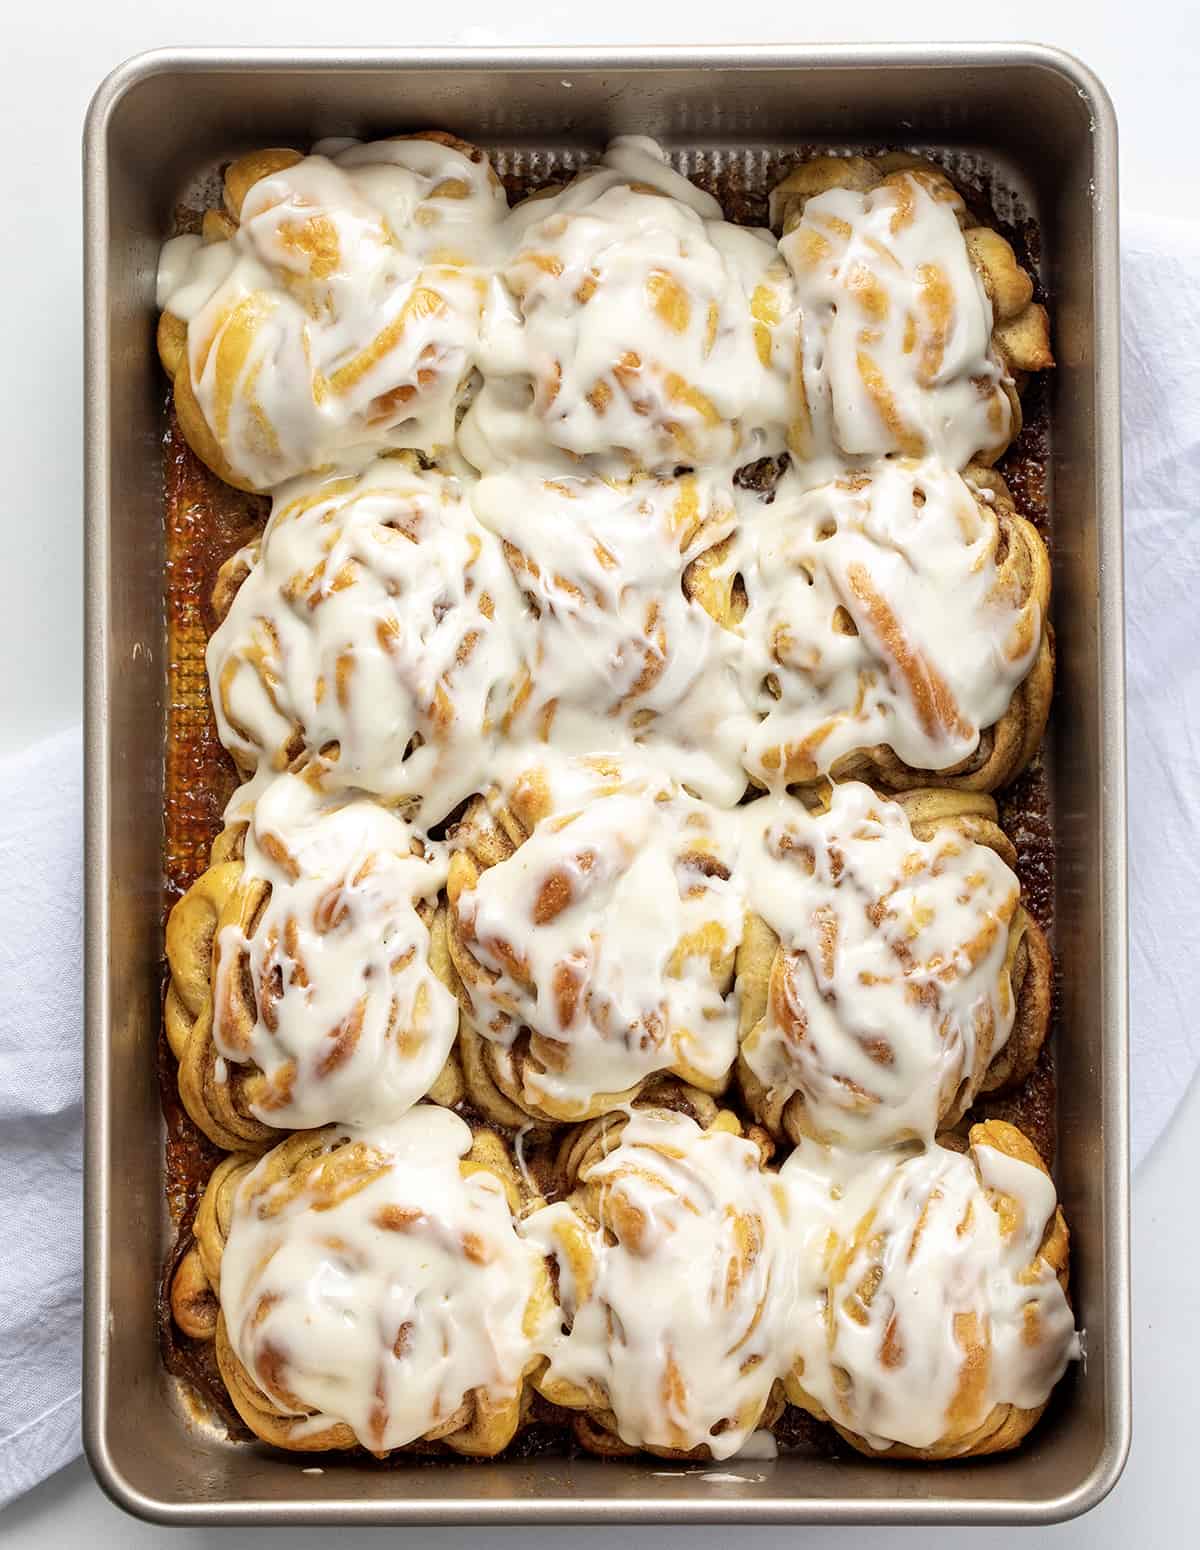 Frosted Braided Cinnamon Rolls in a Pan on a White Counter from Overhead.